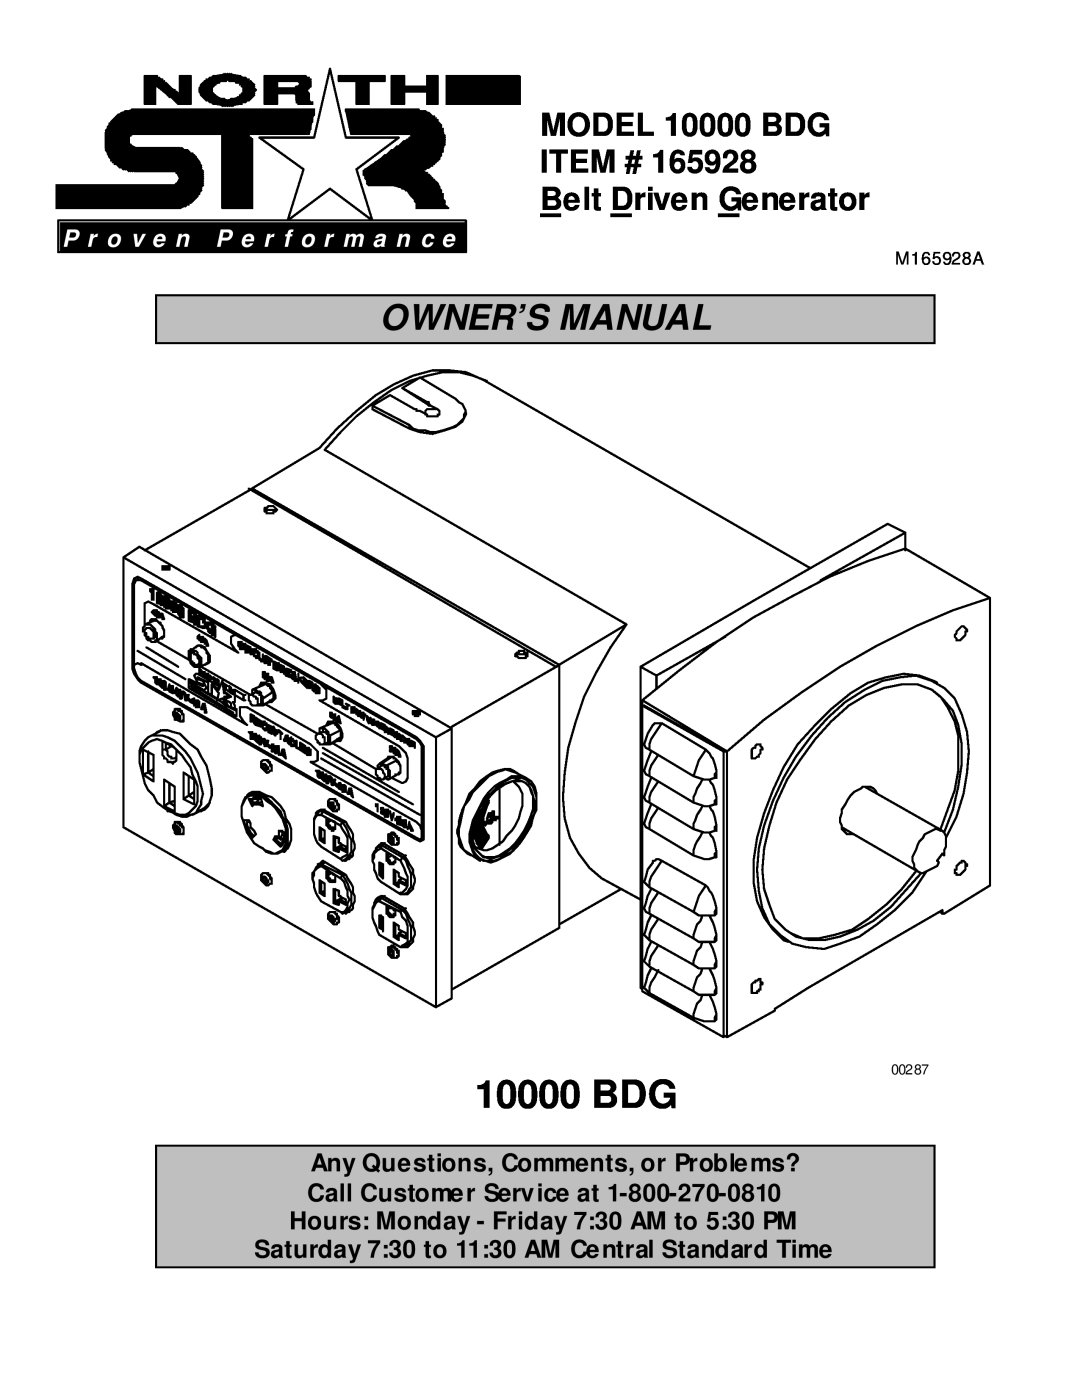 Northern Industrial Tools owner manual MODEL 10000 BDG ITEM # Belt Driven Generator, P r o v e n P e r f o r m a n c e 